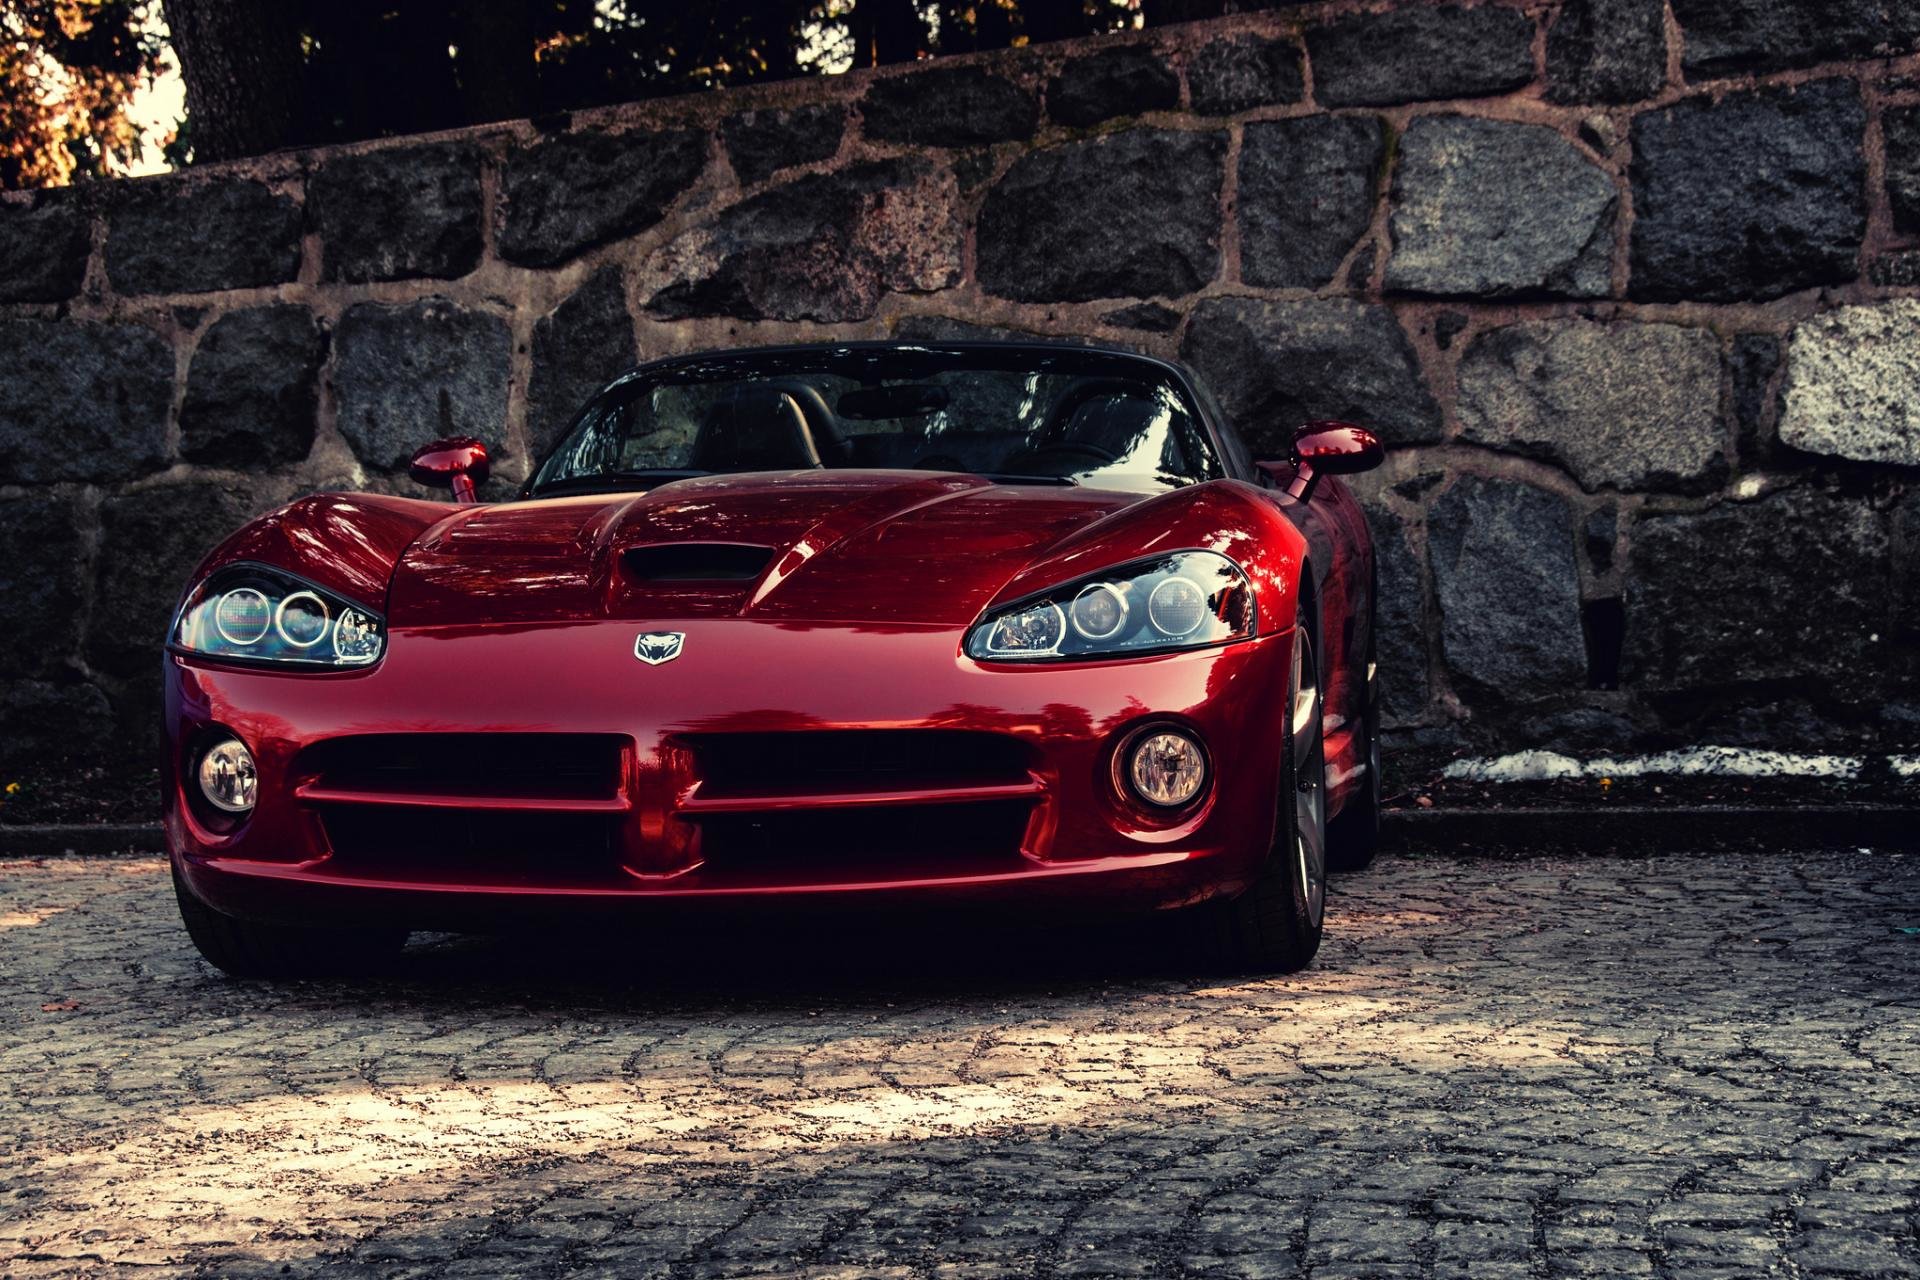 Awesome Dodge Viper free wallpaper ID:8321 for hd 1920x1280 desktop